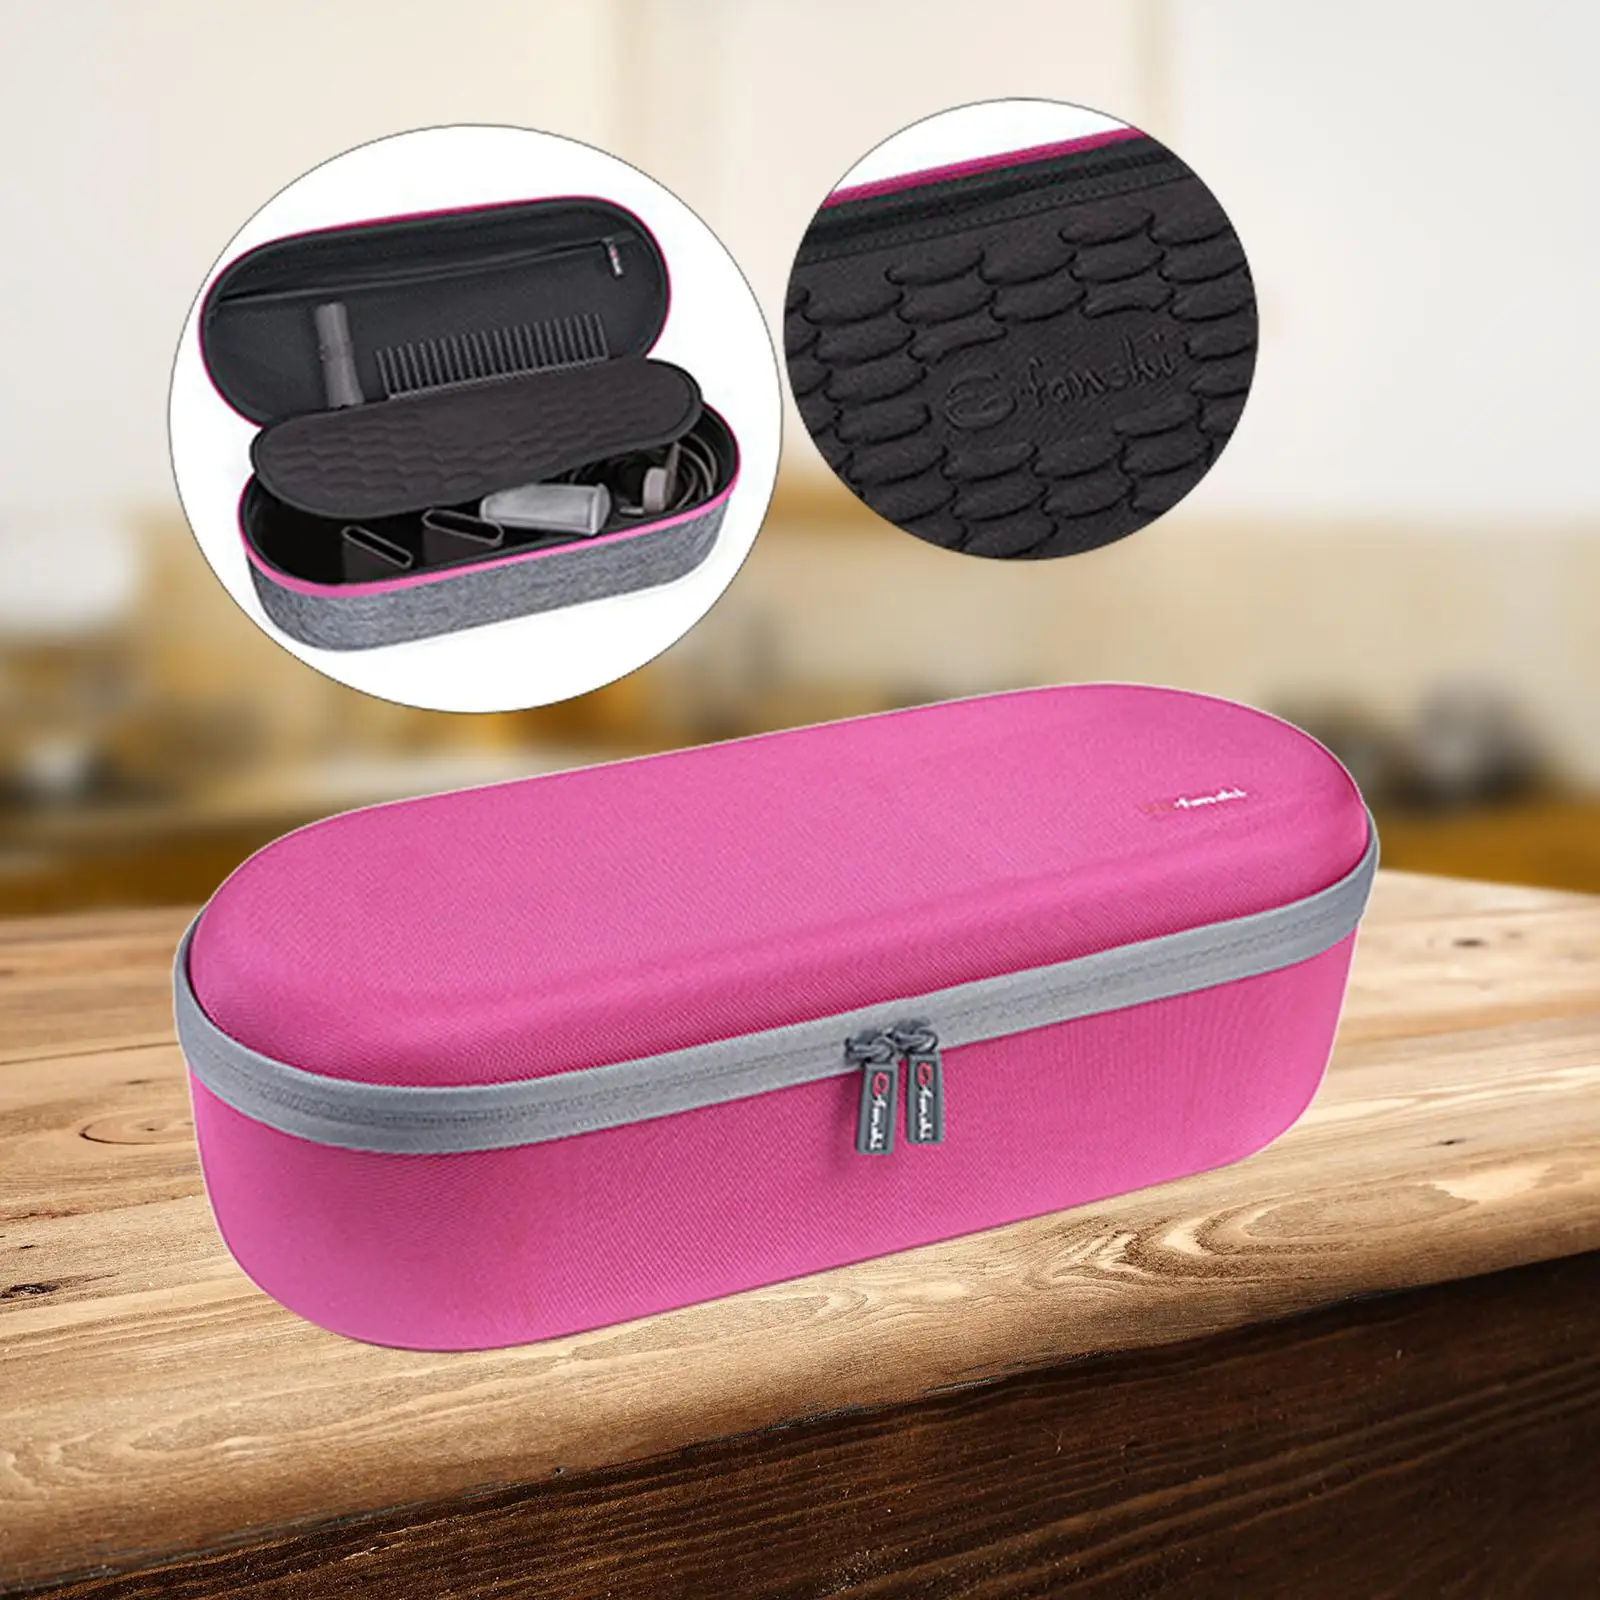 Compact Hard Case Large Space Carry Bags for & Accessories Dyson Hair Dryer